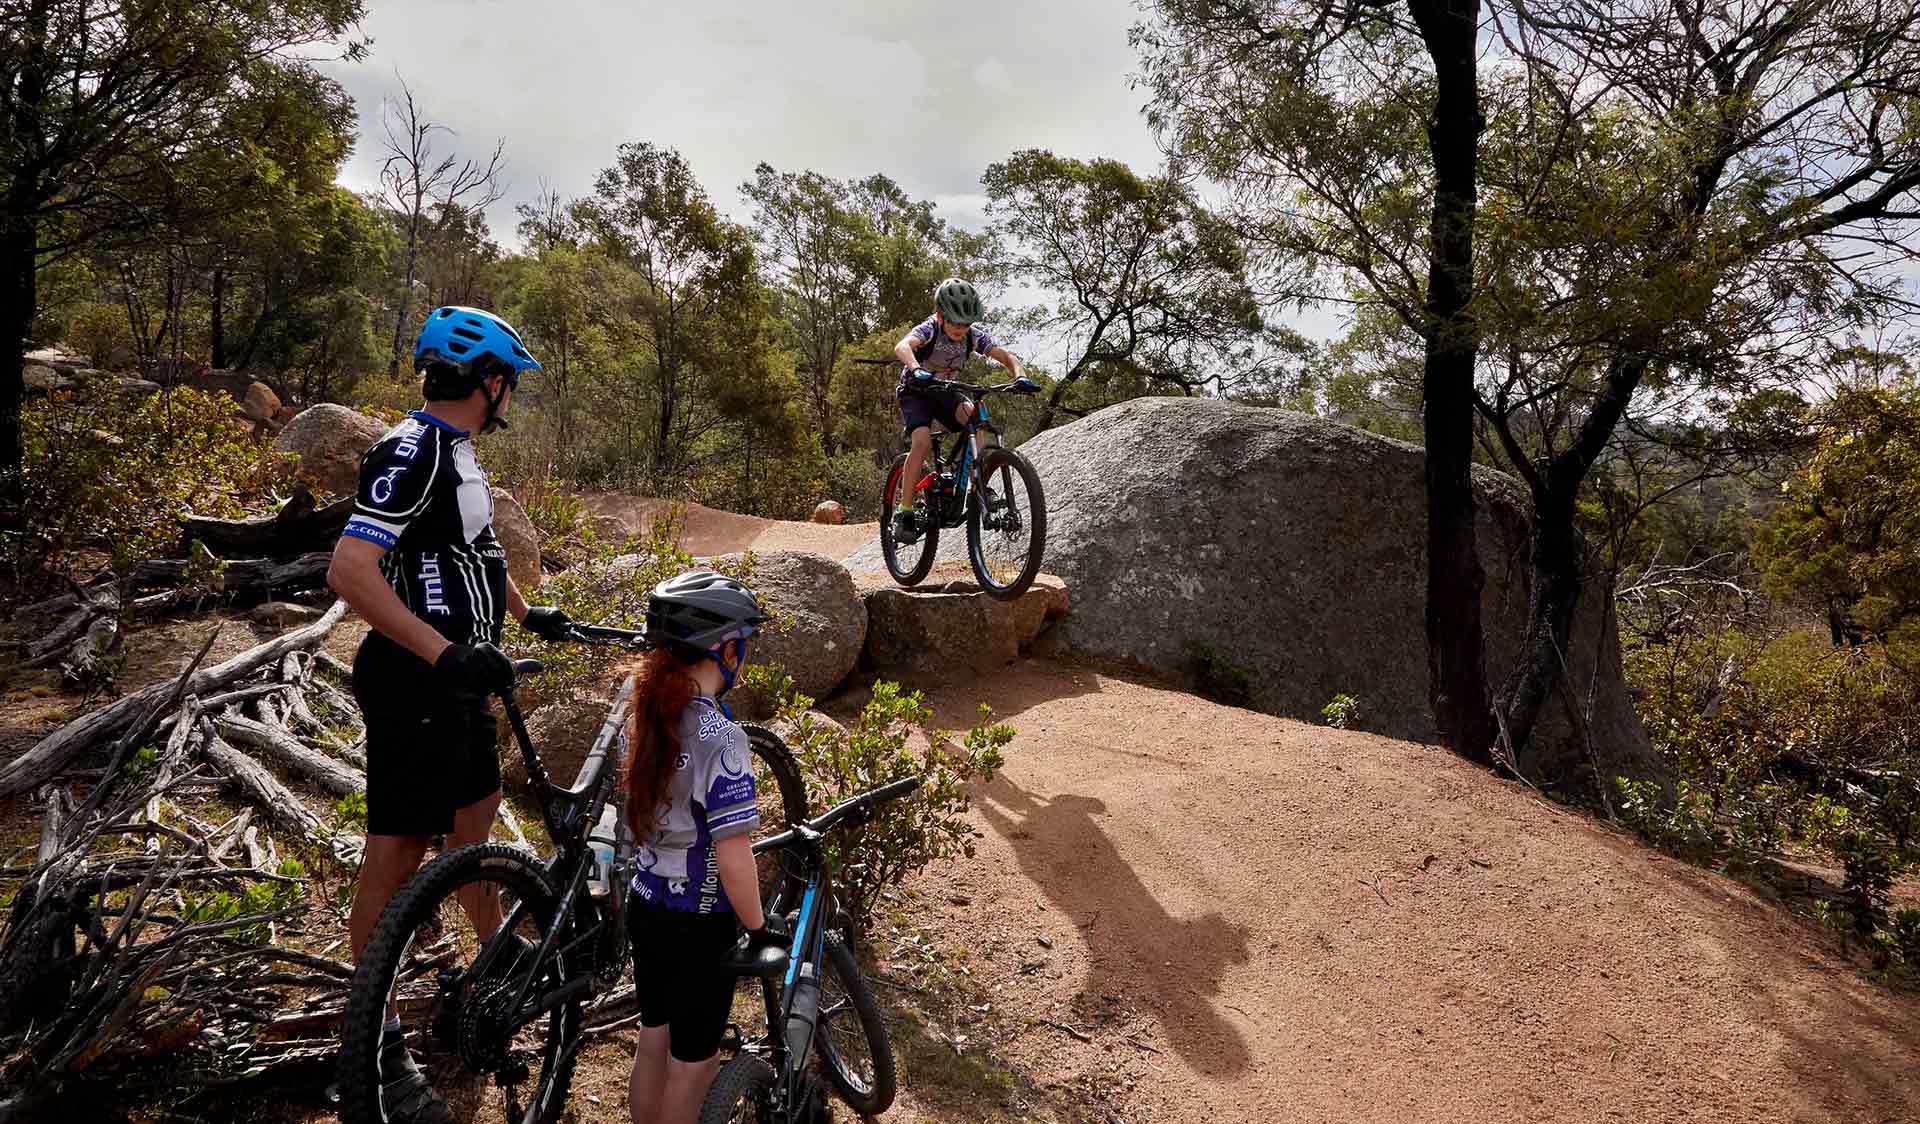 A young boy riding his bike in the Stockyards mountain bike area with his father and sister watching